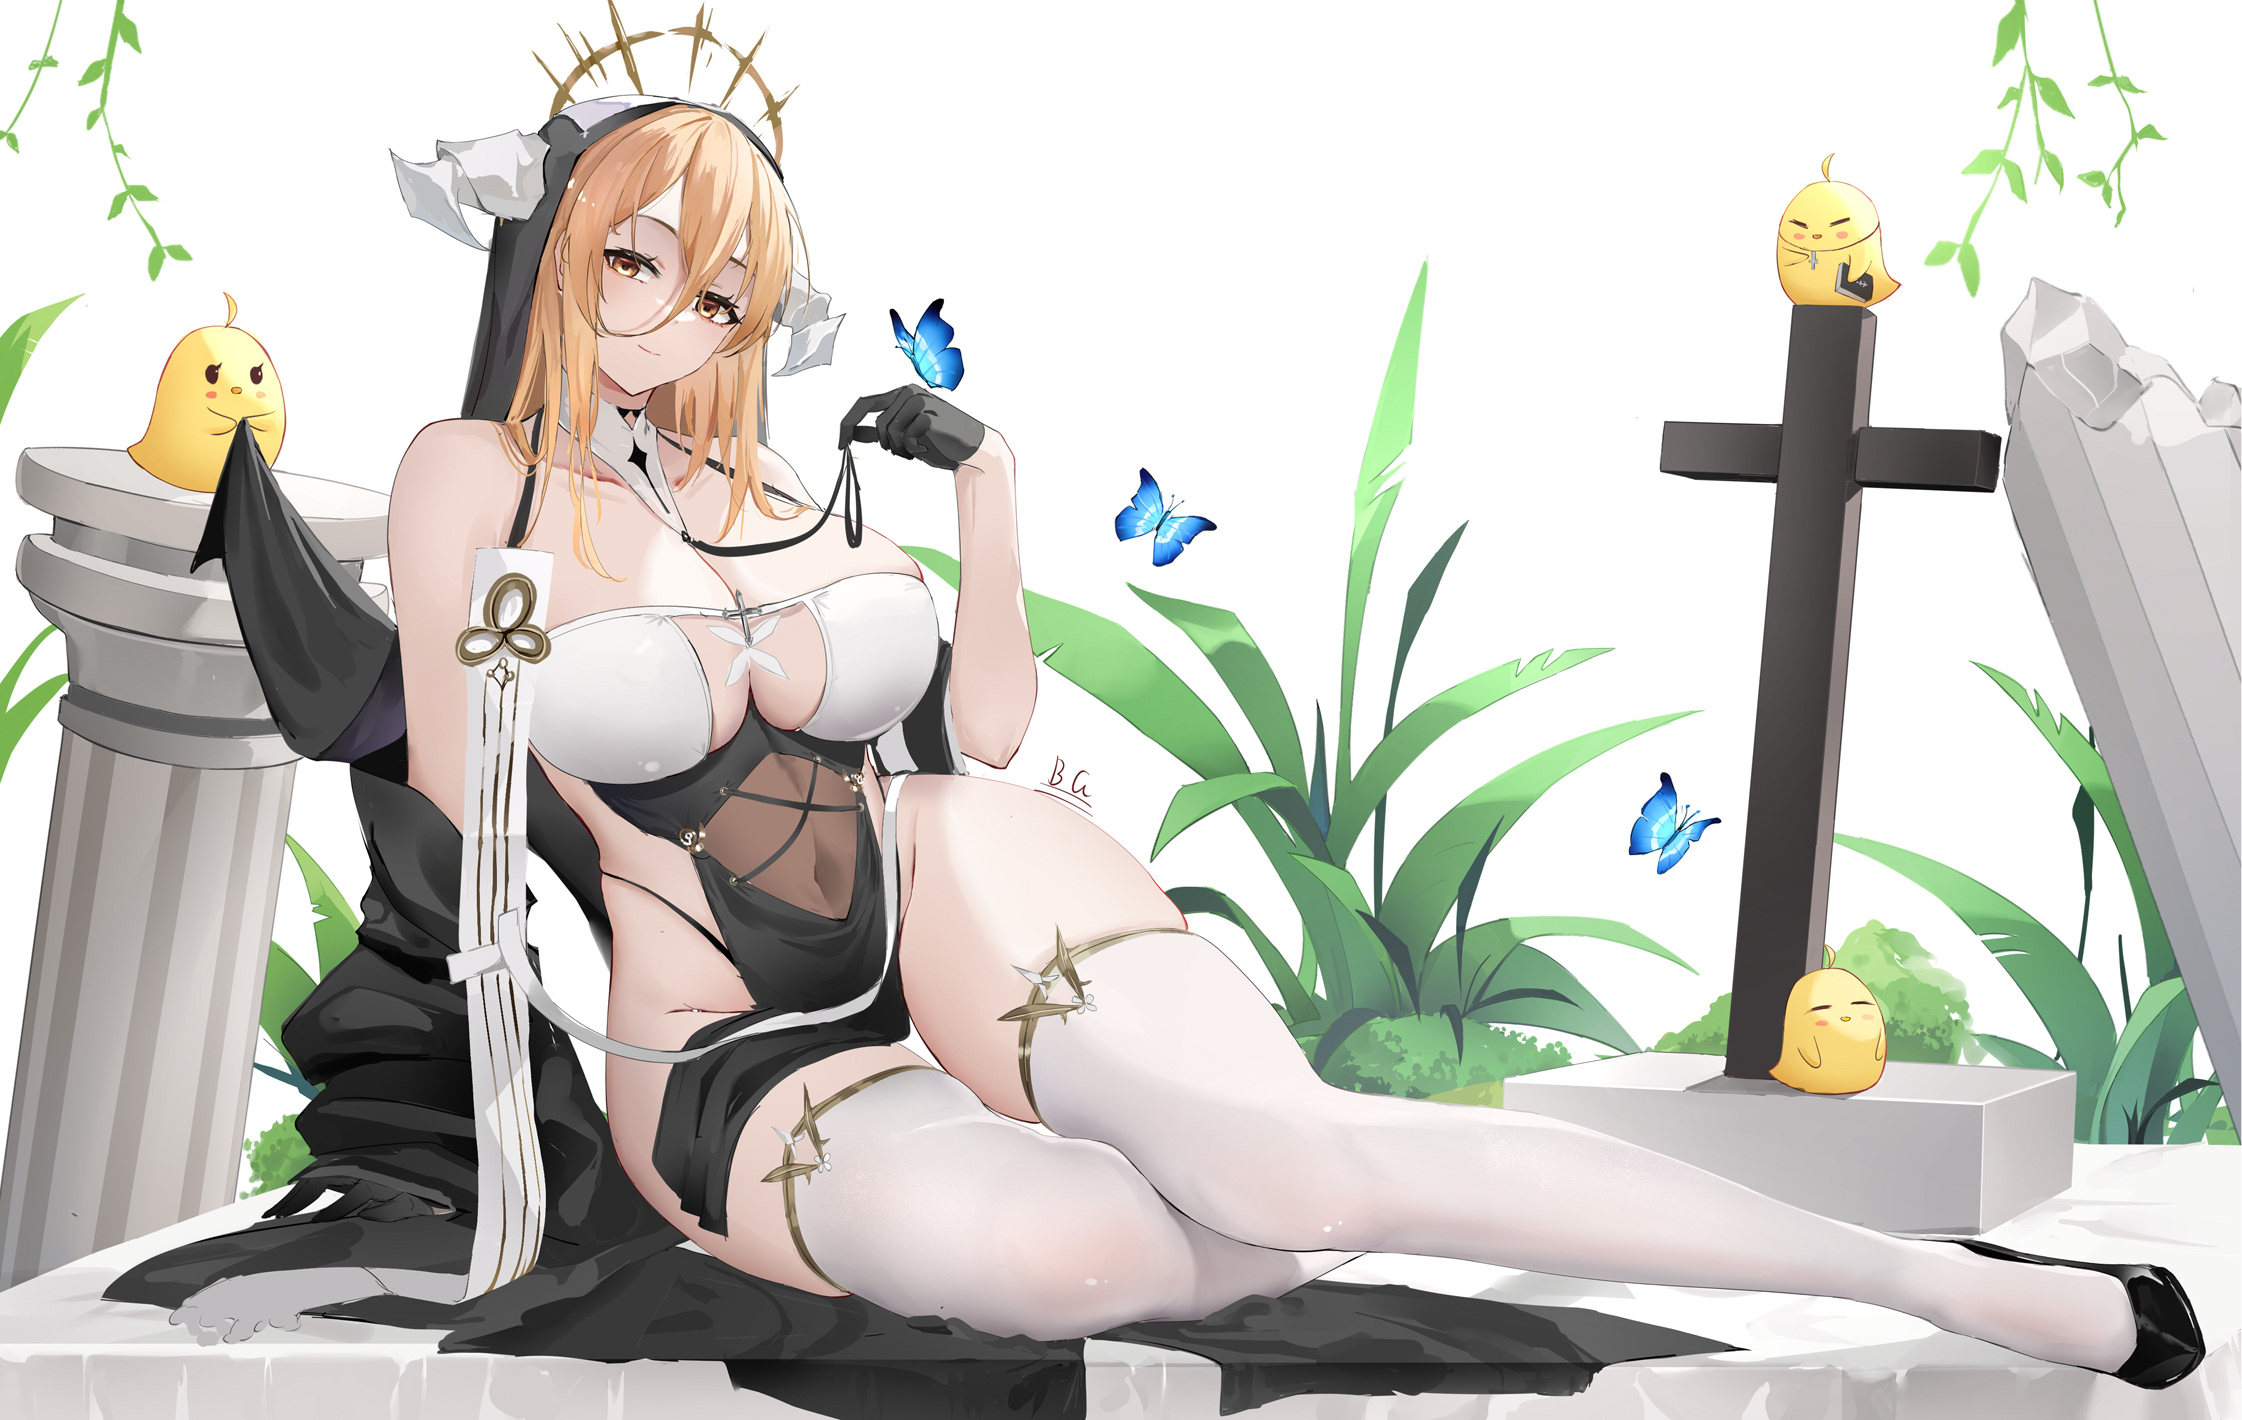 Anime 2242x1420 anime girls video games Azur Lane Implacable(Azur Lane) Manjuu (Azur Lane) horns see-through clothing thigh-highs blonde Baige0 stockings no bra gloves nuns nun outfit big boobs leaves looking at viewer cross butterfly